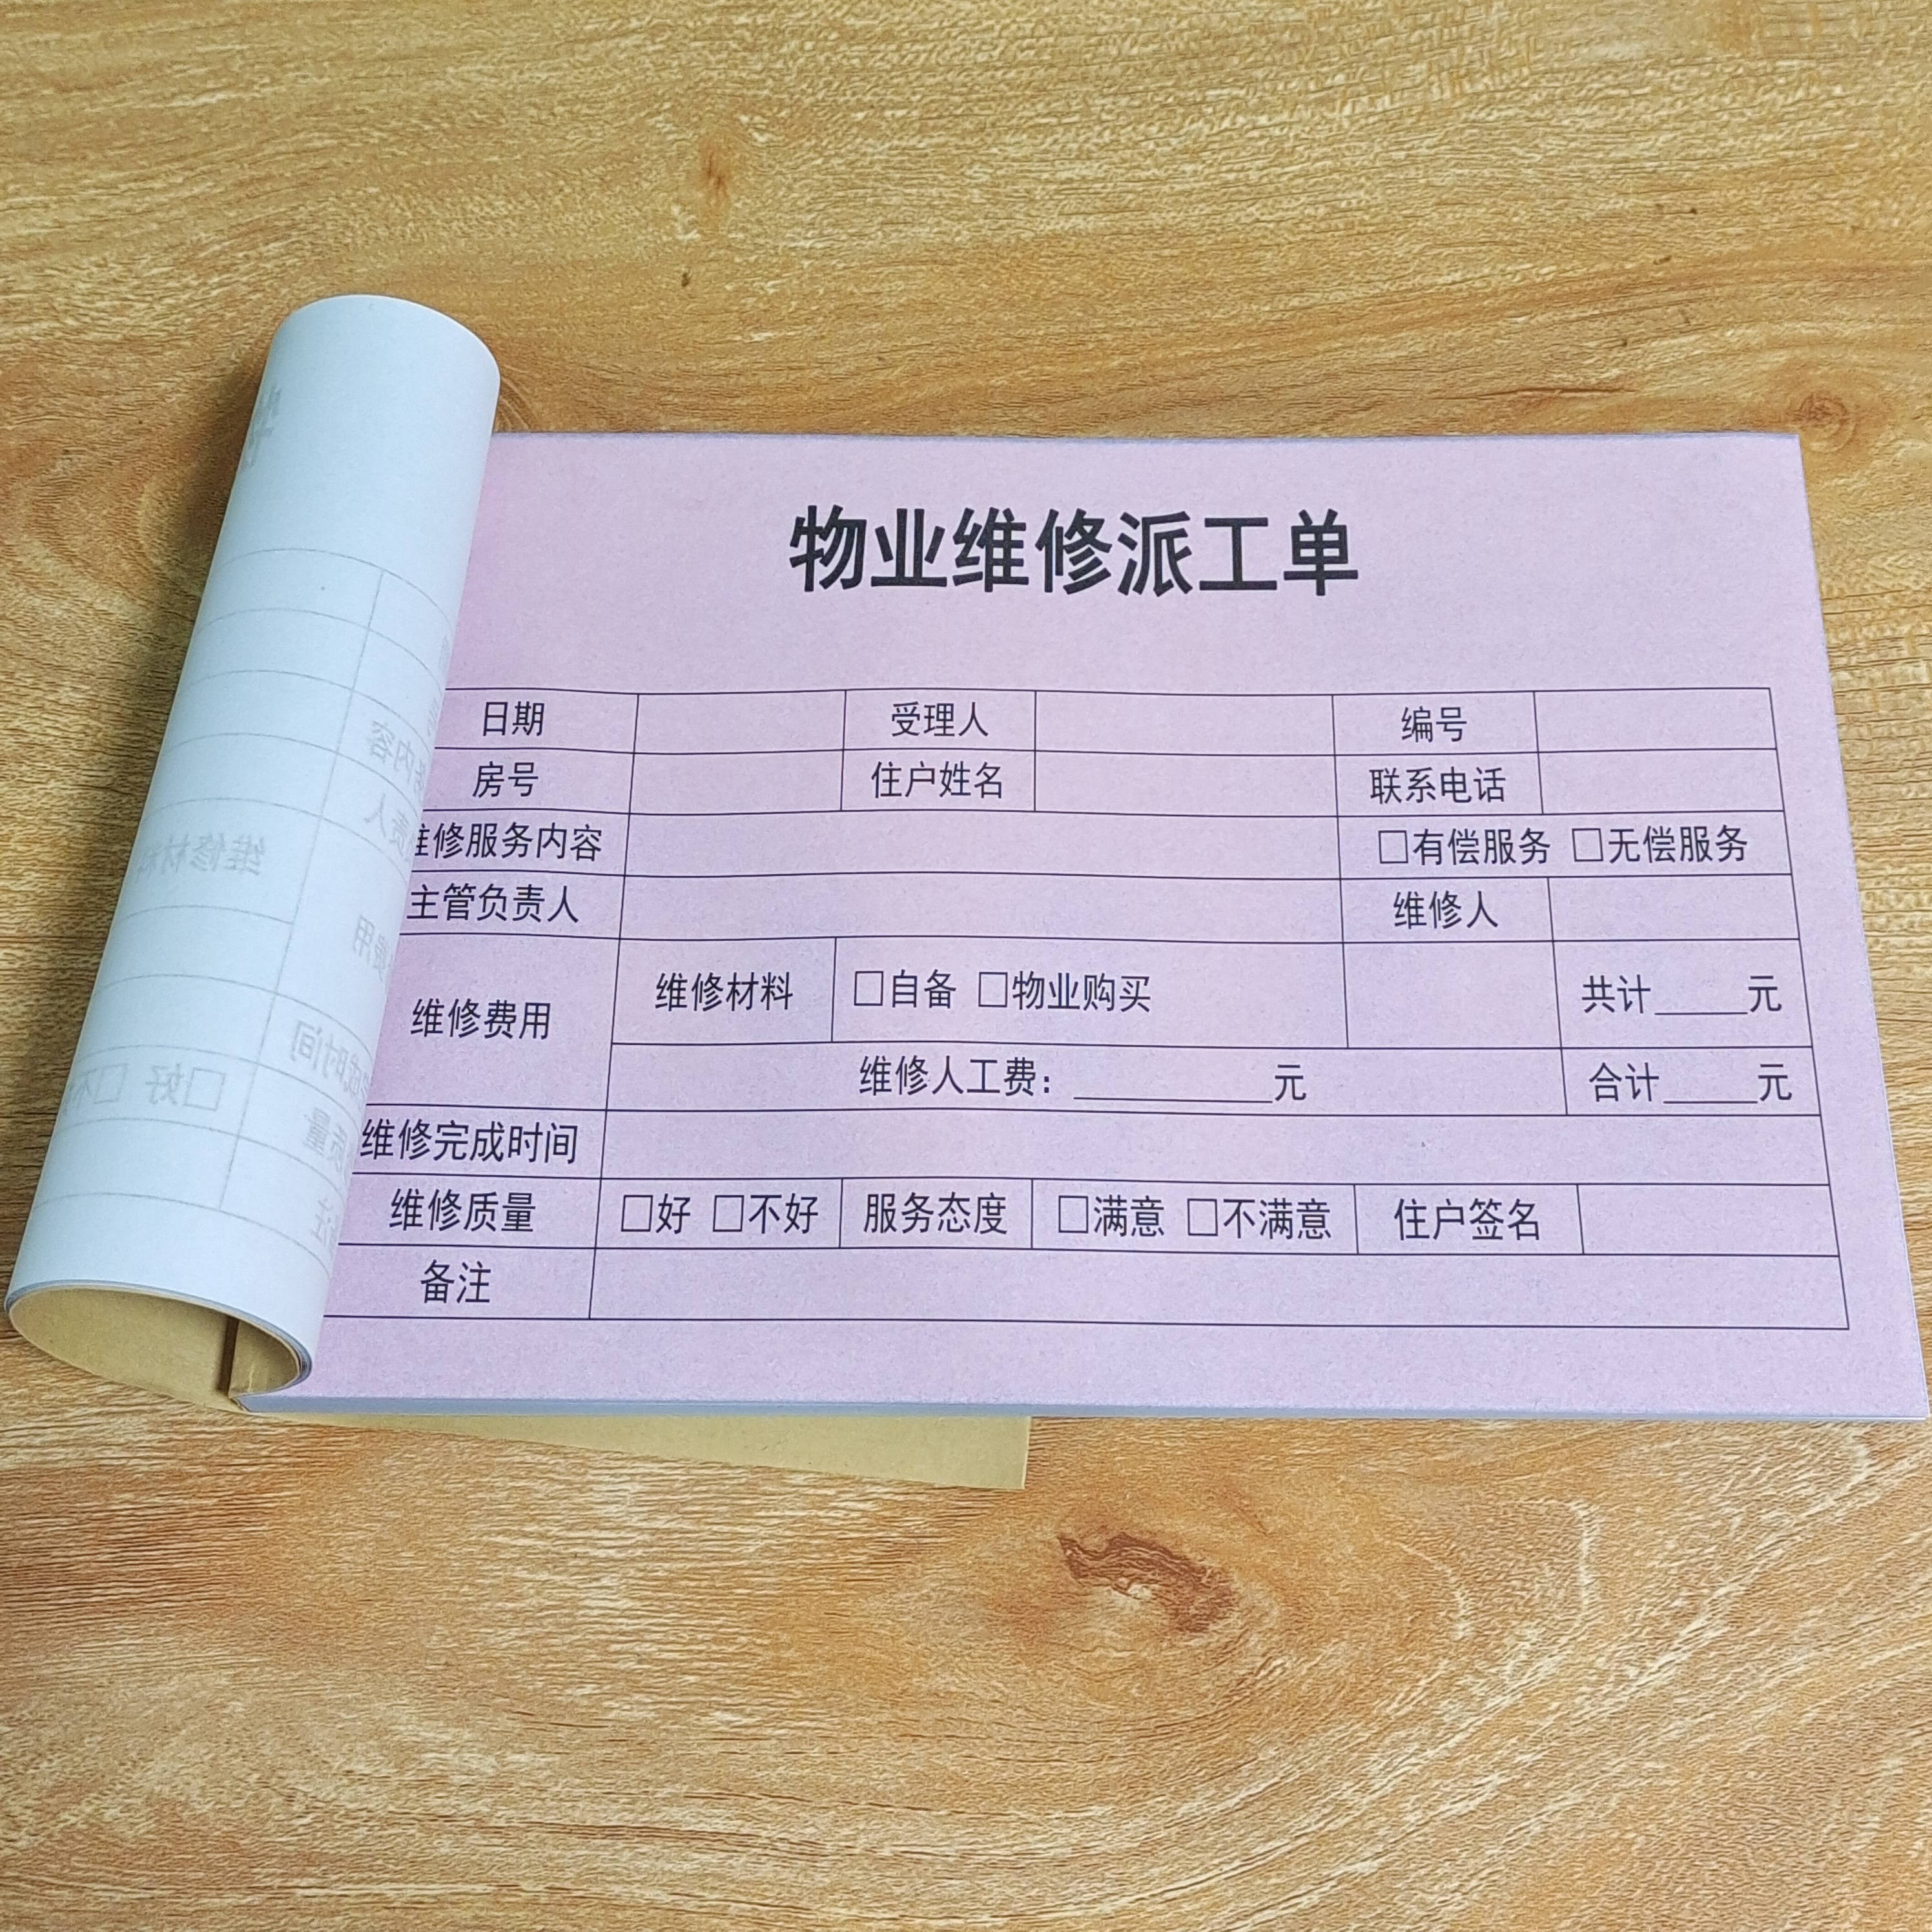 Carbonless Paper Receipt A5 size books Printing Custom